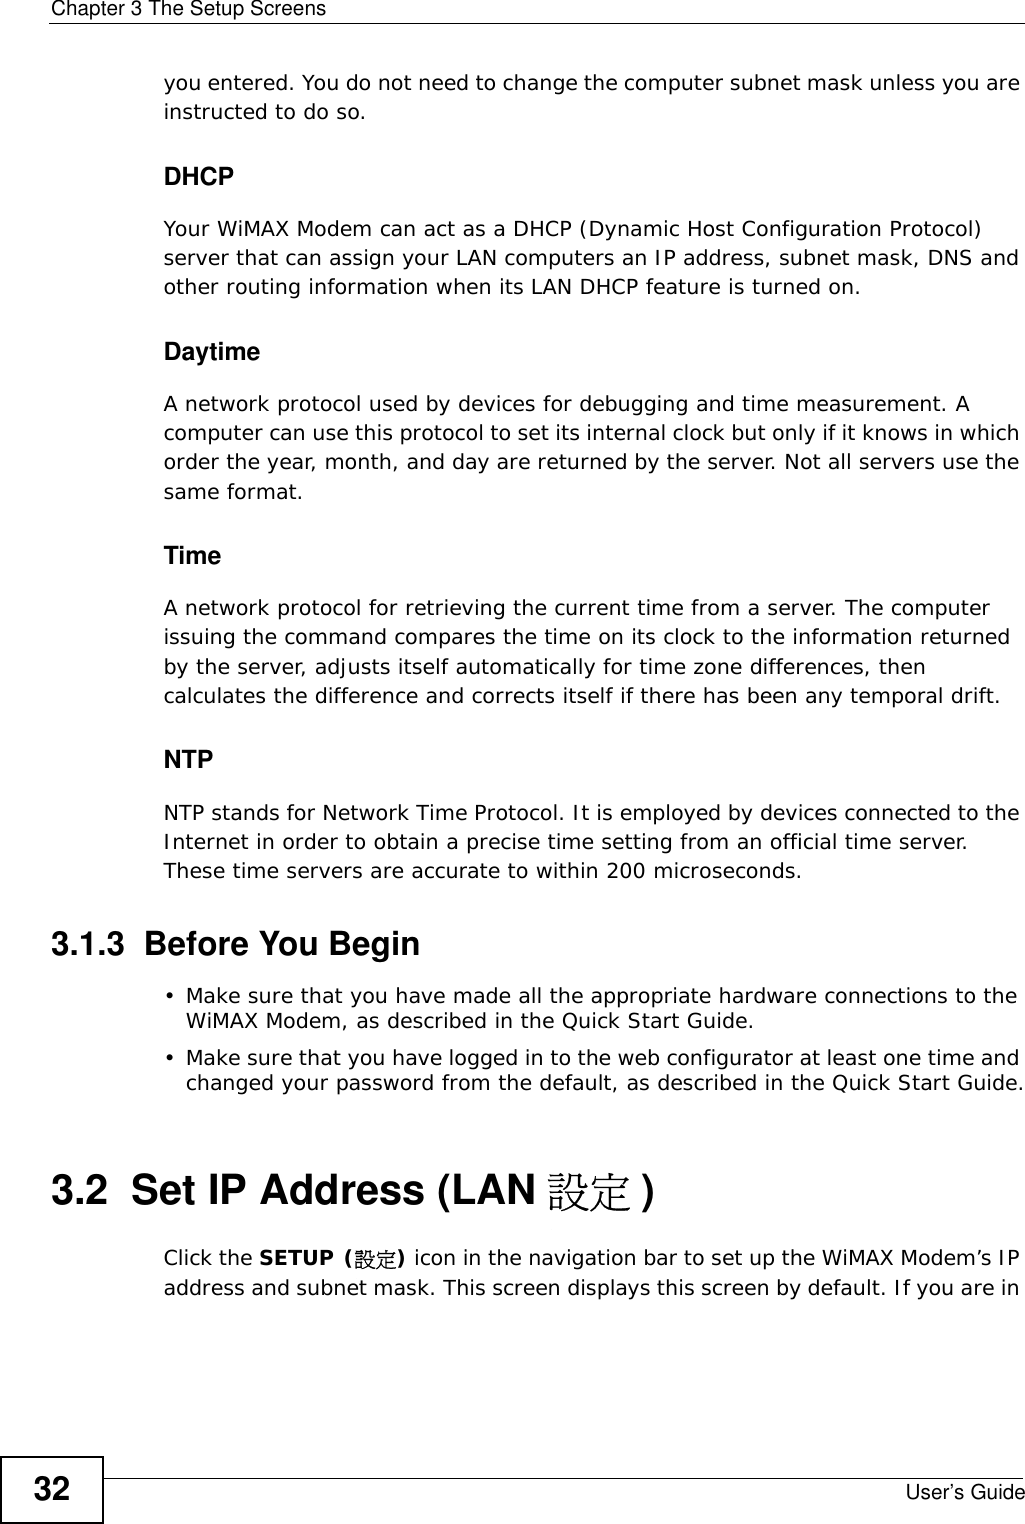 Chapter 3 The Setup ScreensUser’s Guide32you entered. You do not need to change the computer subnet mask unless you are instructed to do so.DHCPYour WiMAX Modem can act as a DHCP (Dynamic Host Configuration Protocol) server that can assign your LAN computers an IP address, subnet mask, DNS and other routing information when its LAN DHCP feature is turned on.DaytimeA network protocol used by devices for debugging and time measurement. A computer can use this protocol to set its internal clock but only if it knows in which order the year, month, and day are returned by the server. Not all servers use the same format.TimeA network protocol for retrieving the current time from a server. The computer issuing the command compares the time on its clock to the information returned by the server, adjusts itself automatically for time zone differences, then calculates the difference and corrects itself if there has been any temporal drift.NTPNTP stands for Network Time Protocol. It is employed by devices connected to the Internet in order to obtain a precise time setting from an official time server. These time servers are accurate to within 200 microseconds.3.1.3  Before You Begin• Make sure that you have made all the appropriate hardware connections to the WiMAX Modem, as described in the Quick Start Guide.• Make sure that you have logged in to the web configurator at least one time and changed your password from the default, as described in the Quick Start Guide.3.2  Set IP Address (LAN 設定 )Click the SETUP (設定) icon in the navigation bar to set up the WiMAX Modem’s IP address and subnet mask. This screen displays this screen by default. If you are in 